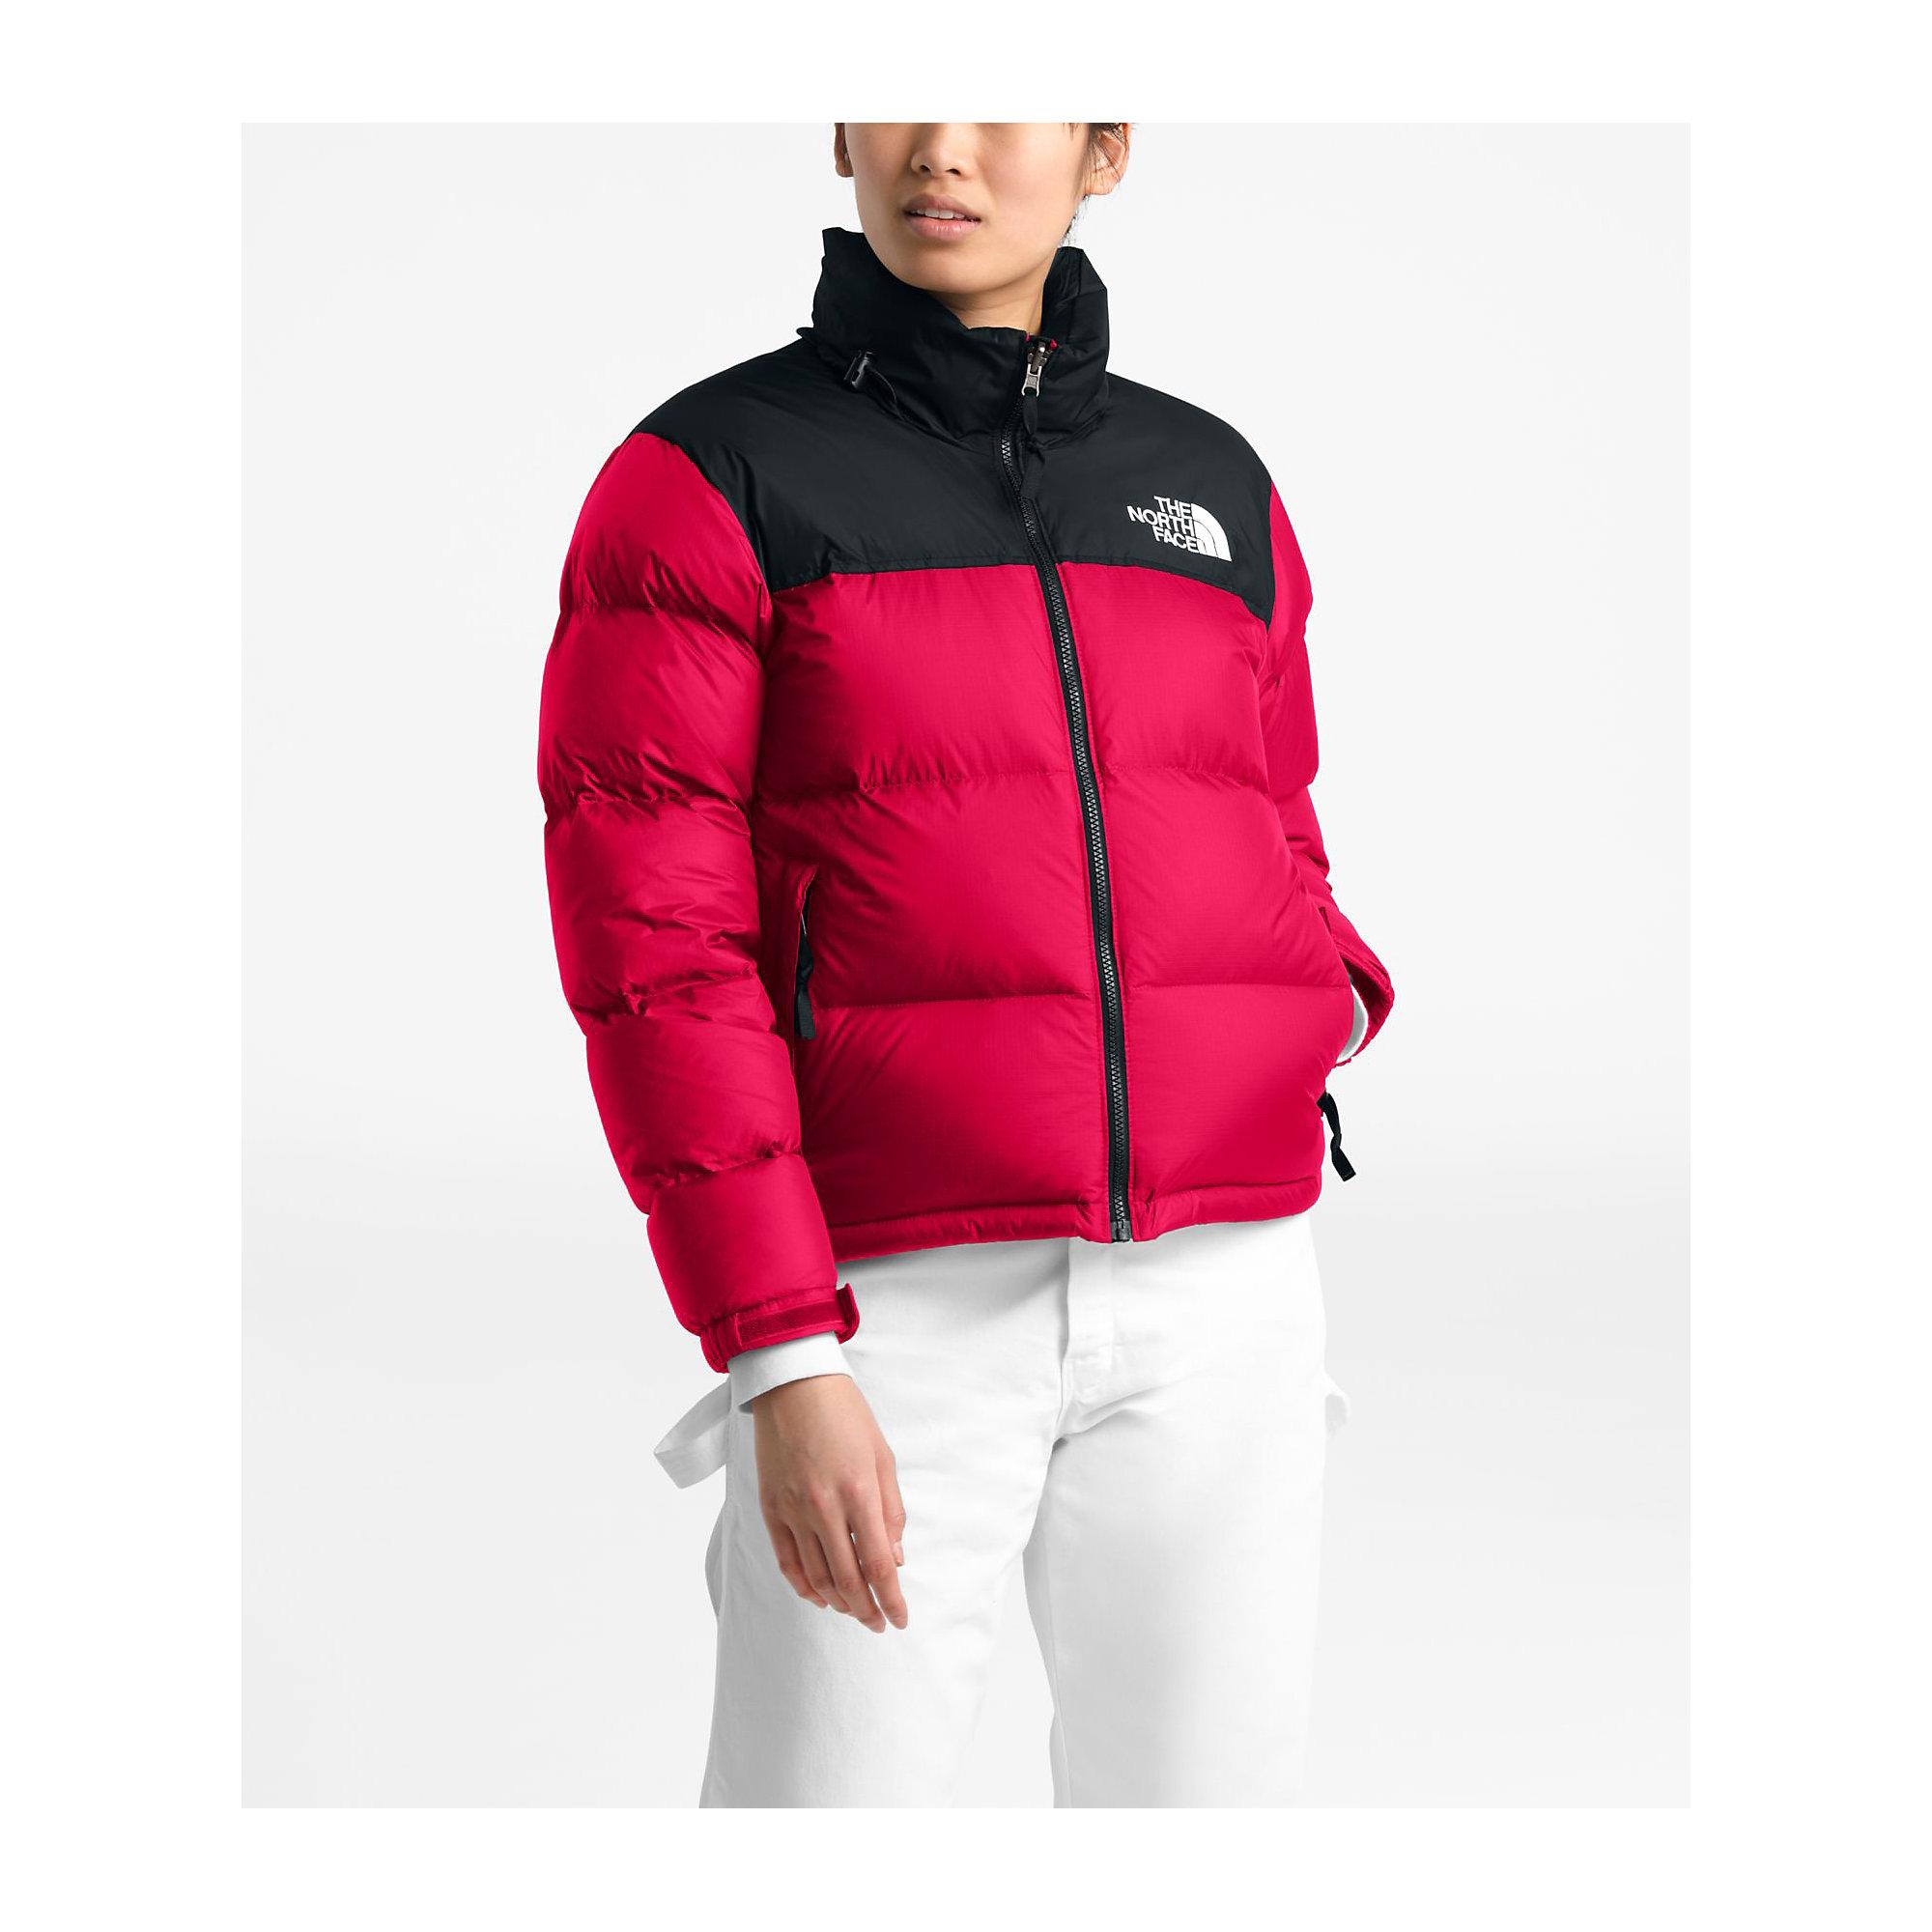 north face puffer jacket red